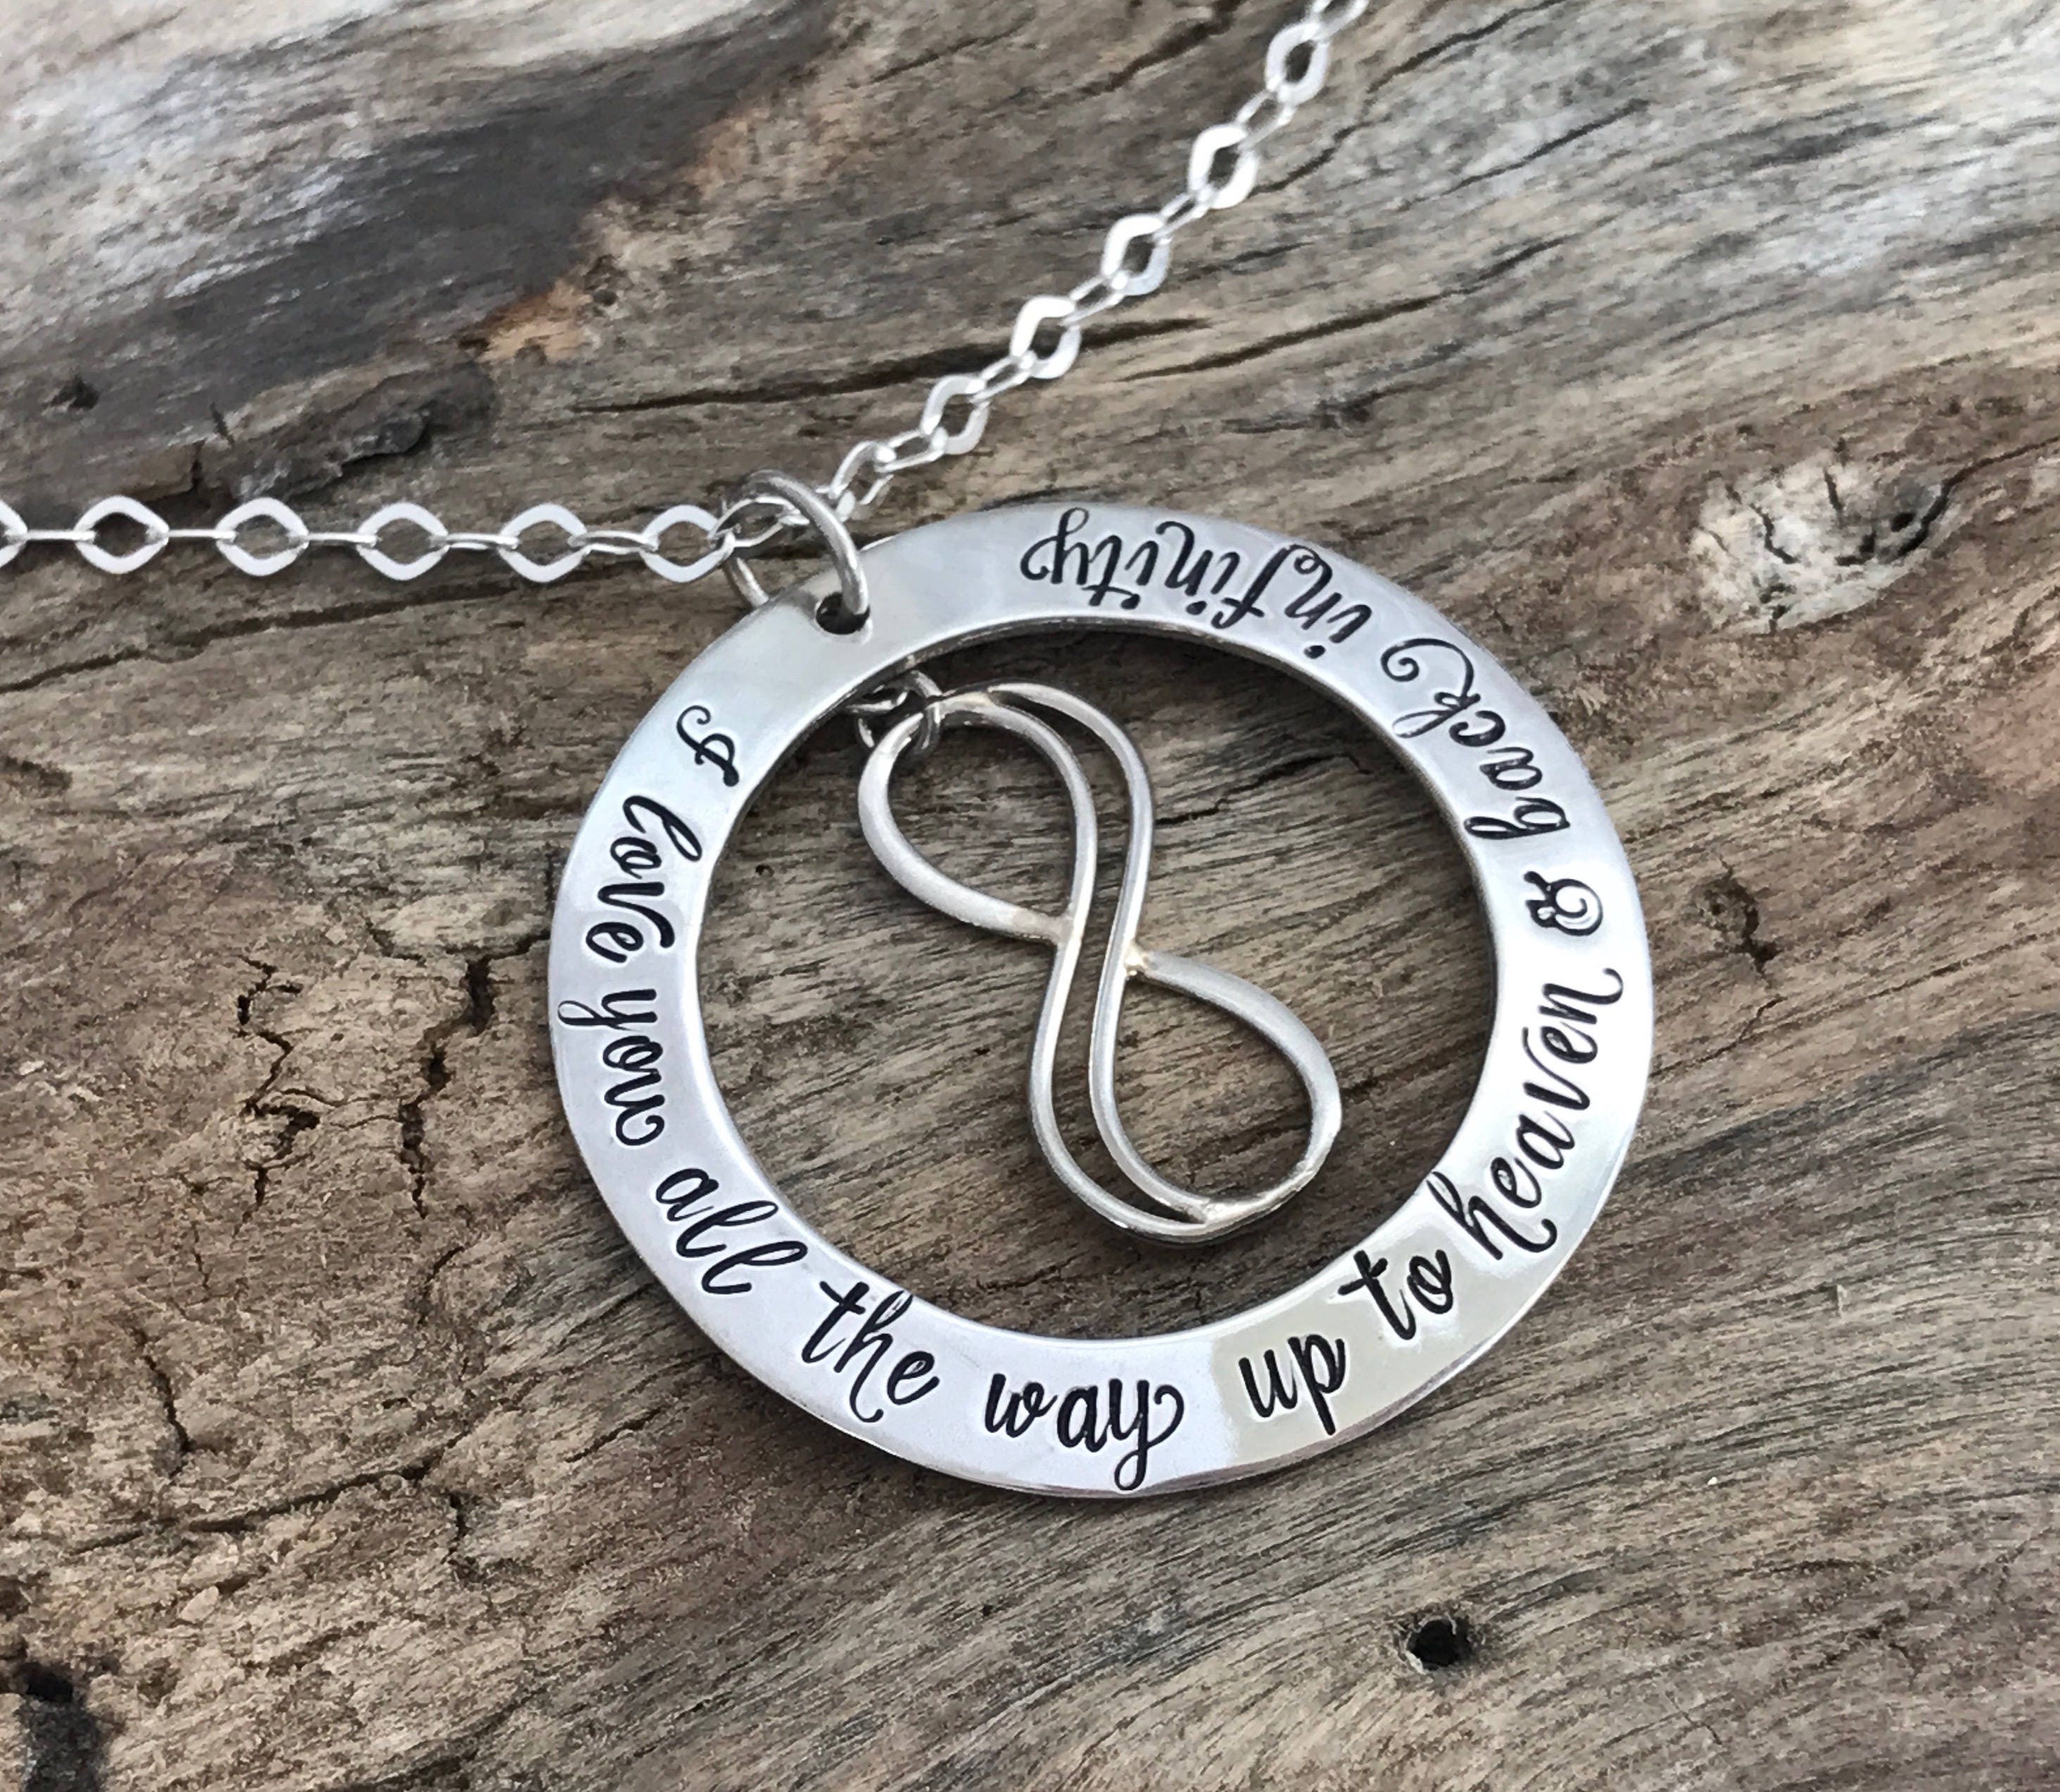 I Love You Infinity Necklace for Men